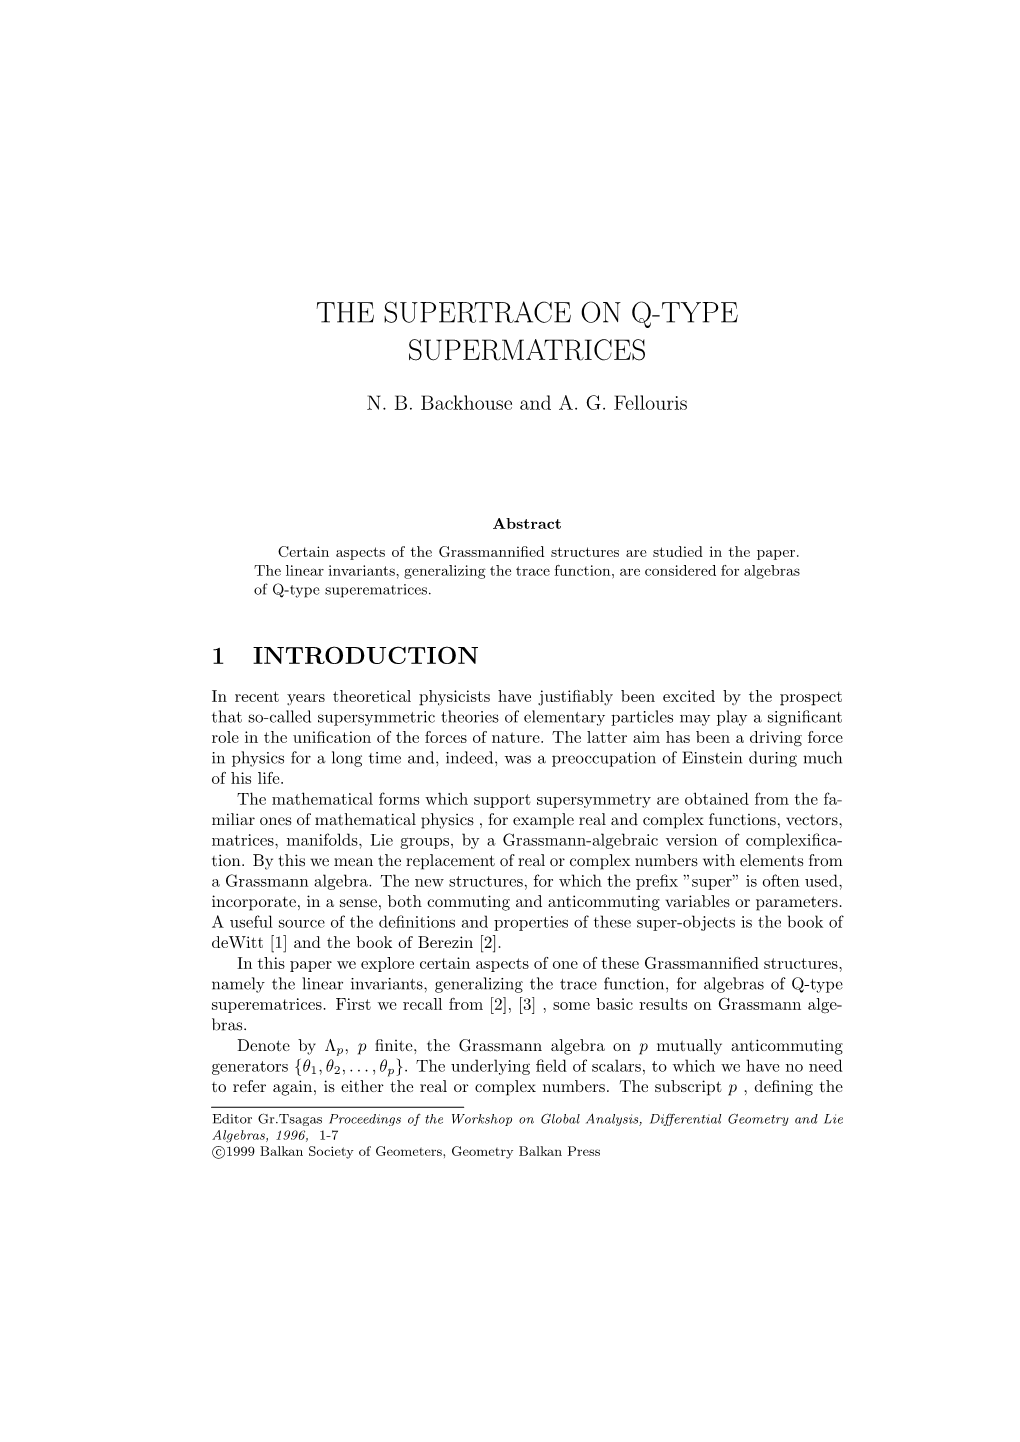 The Supertrace on Q-Type Supermatrices